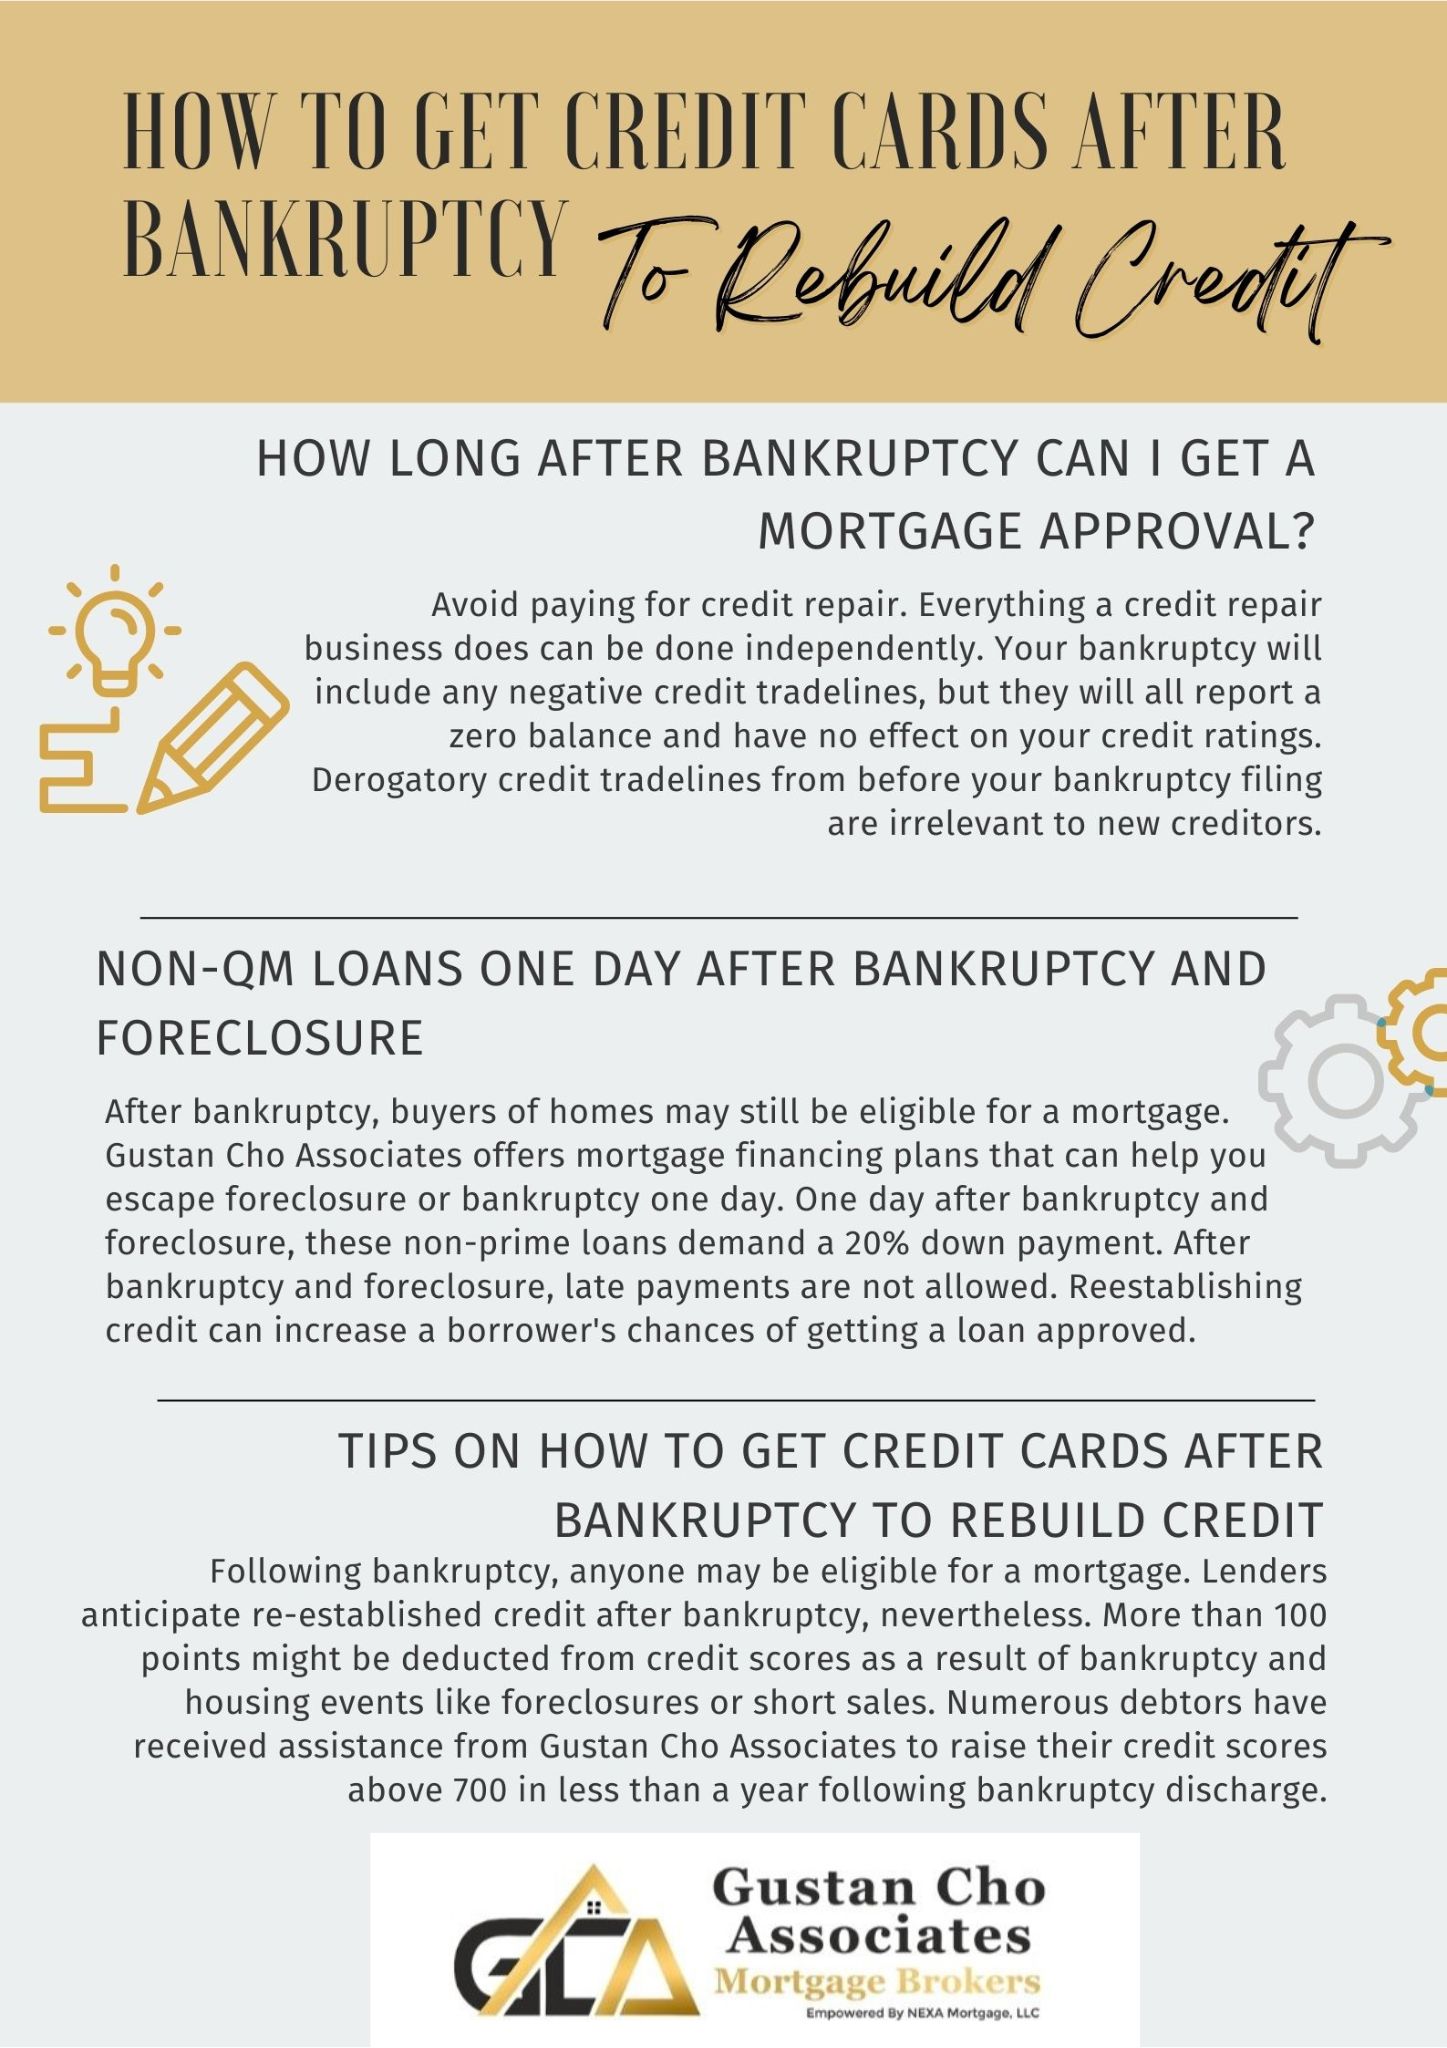 How Long After Bankruptcy Can I Get a Mortgage Approval?